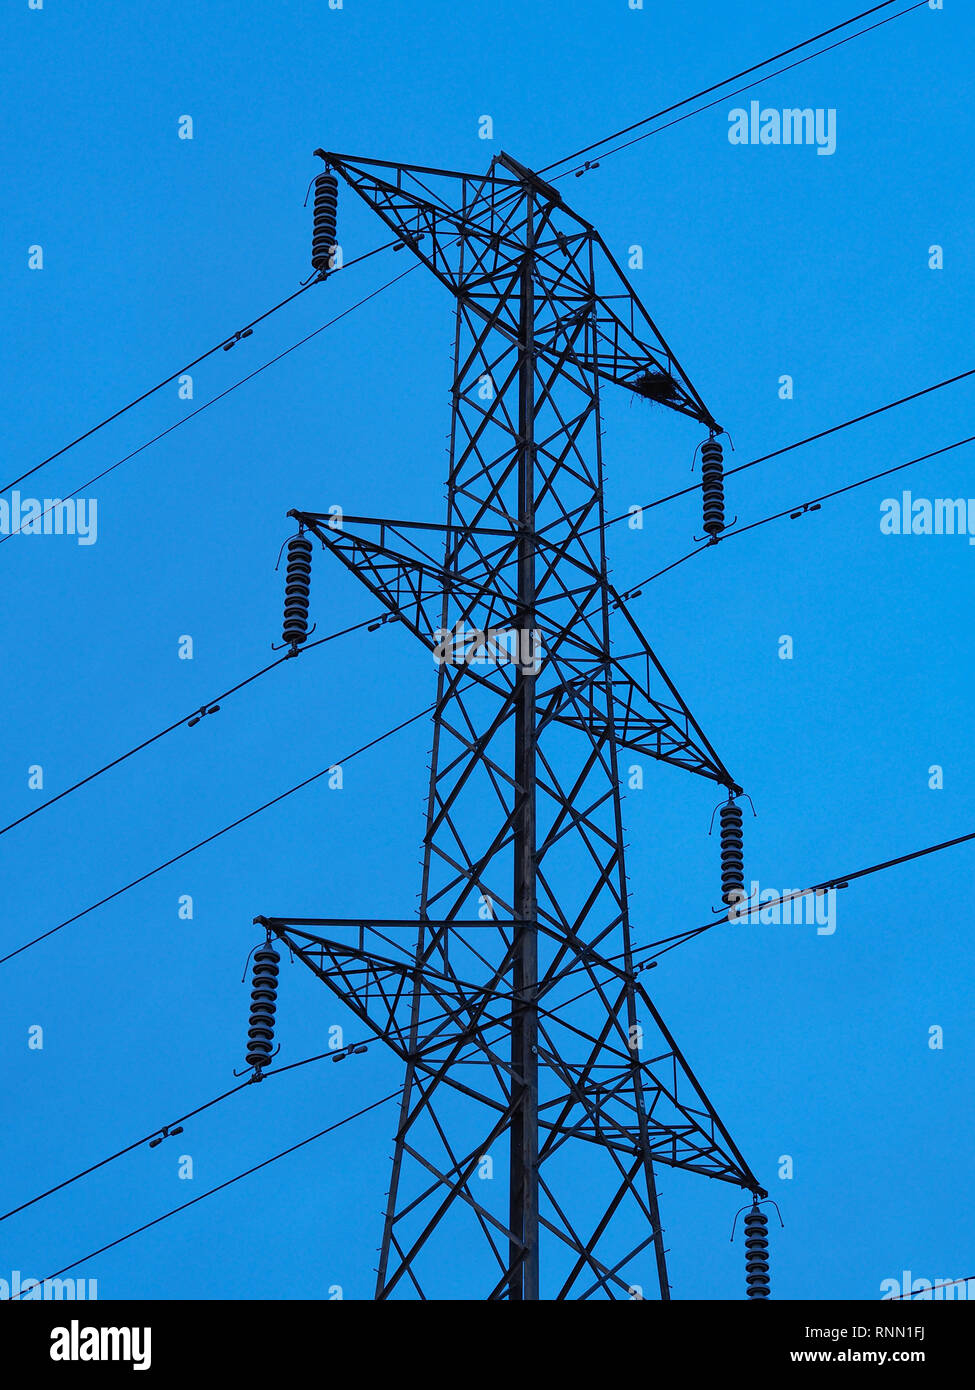 Tall metal pylon supporting power lines with a clear blue sky background Stock Photo